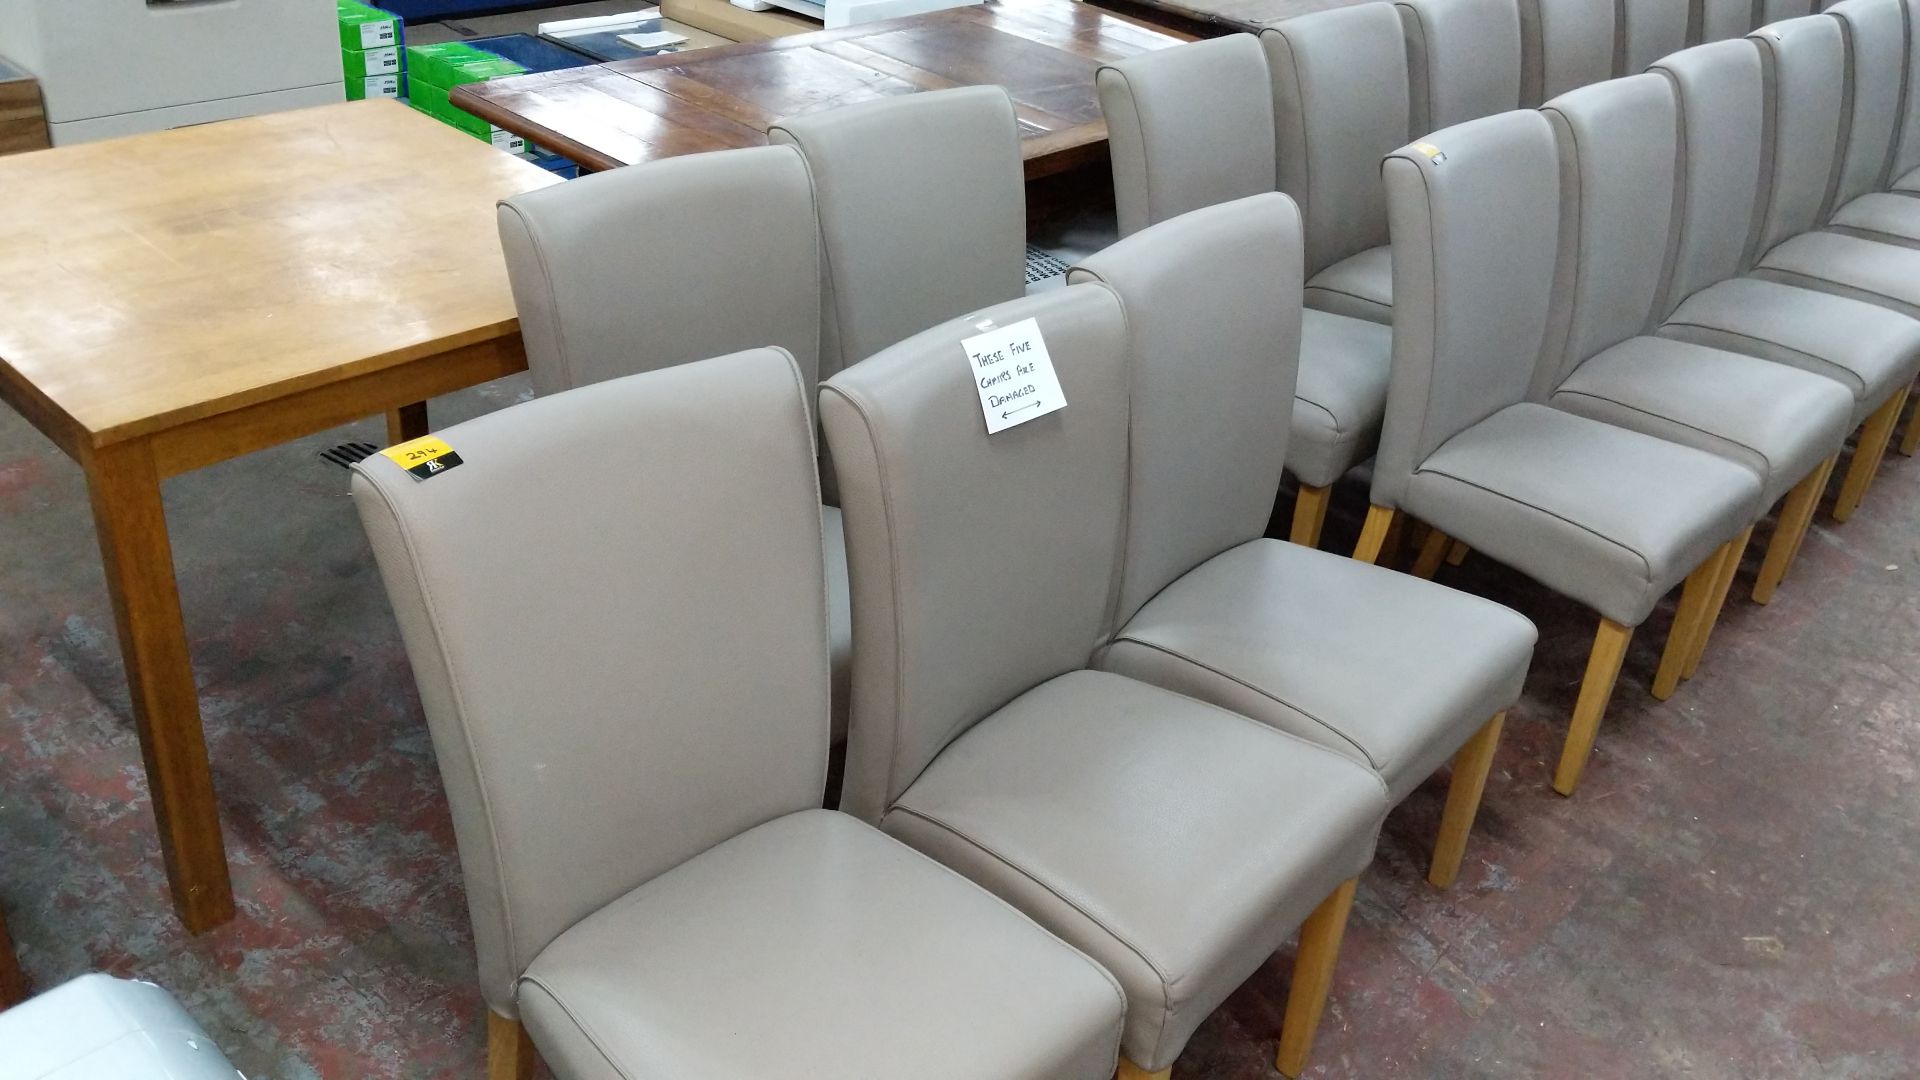 5 off dining chairs with wooden legs, upholstered in taupe leatherette type fabric, understood to - Image 3 of 5